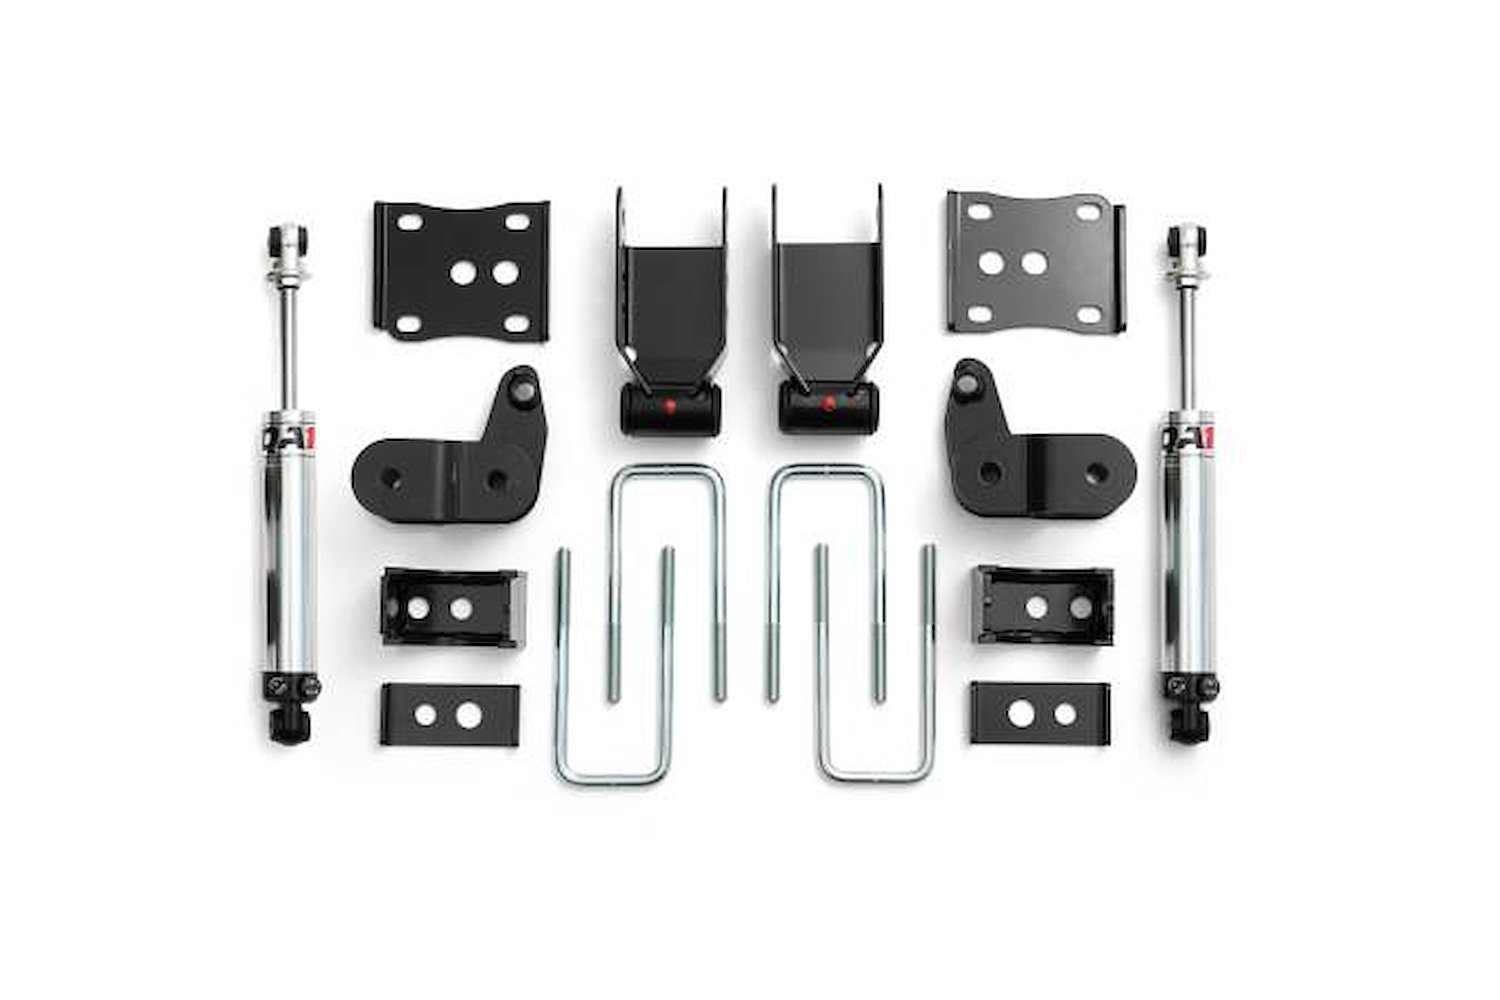 RDK52629 Rear Lowering Kit w/Double-Adjustable Shocks for 2015-2020 Ford F-150 2WD/4WD w/ QA1 Modern Truck Lowering Kit